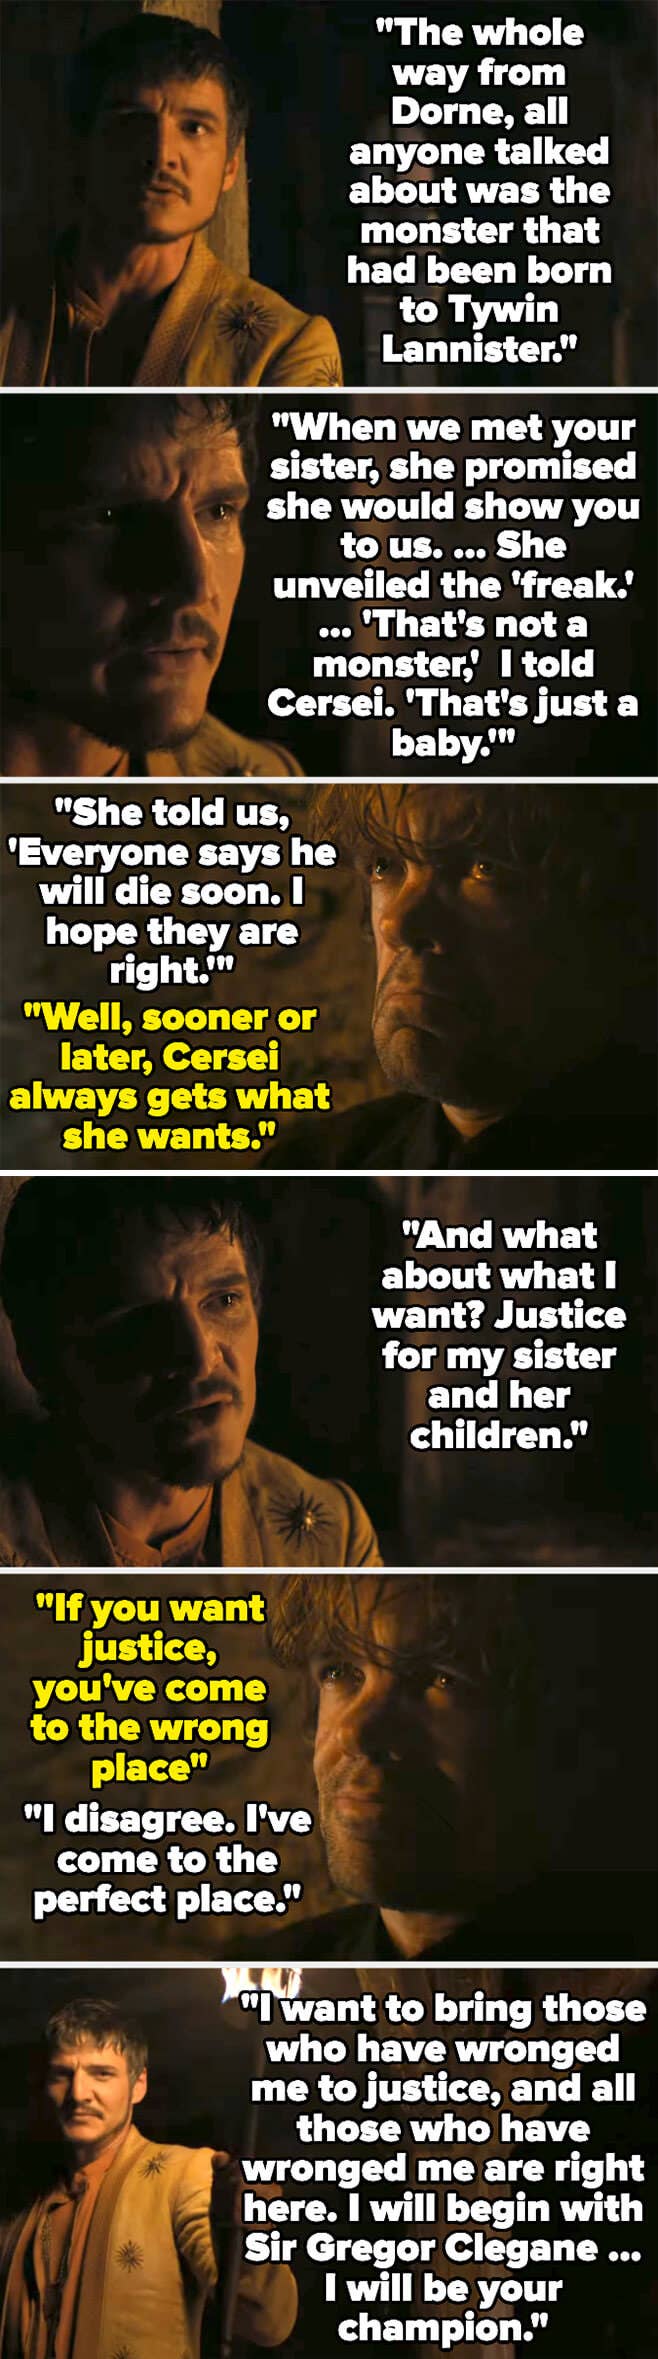 Oberyn telling Tyrion Lannister about the reception to his birth, when his sister Cersei described him as a freak